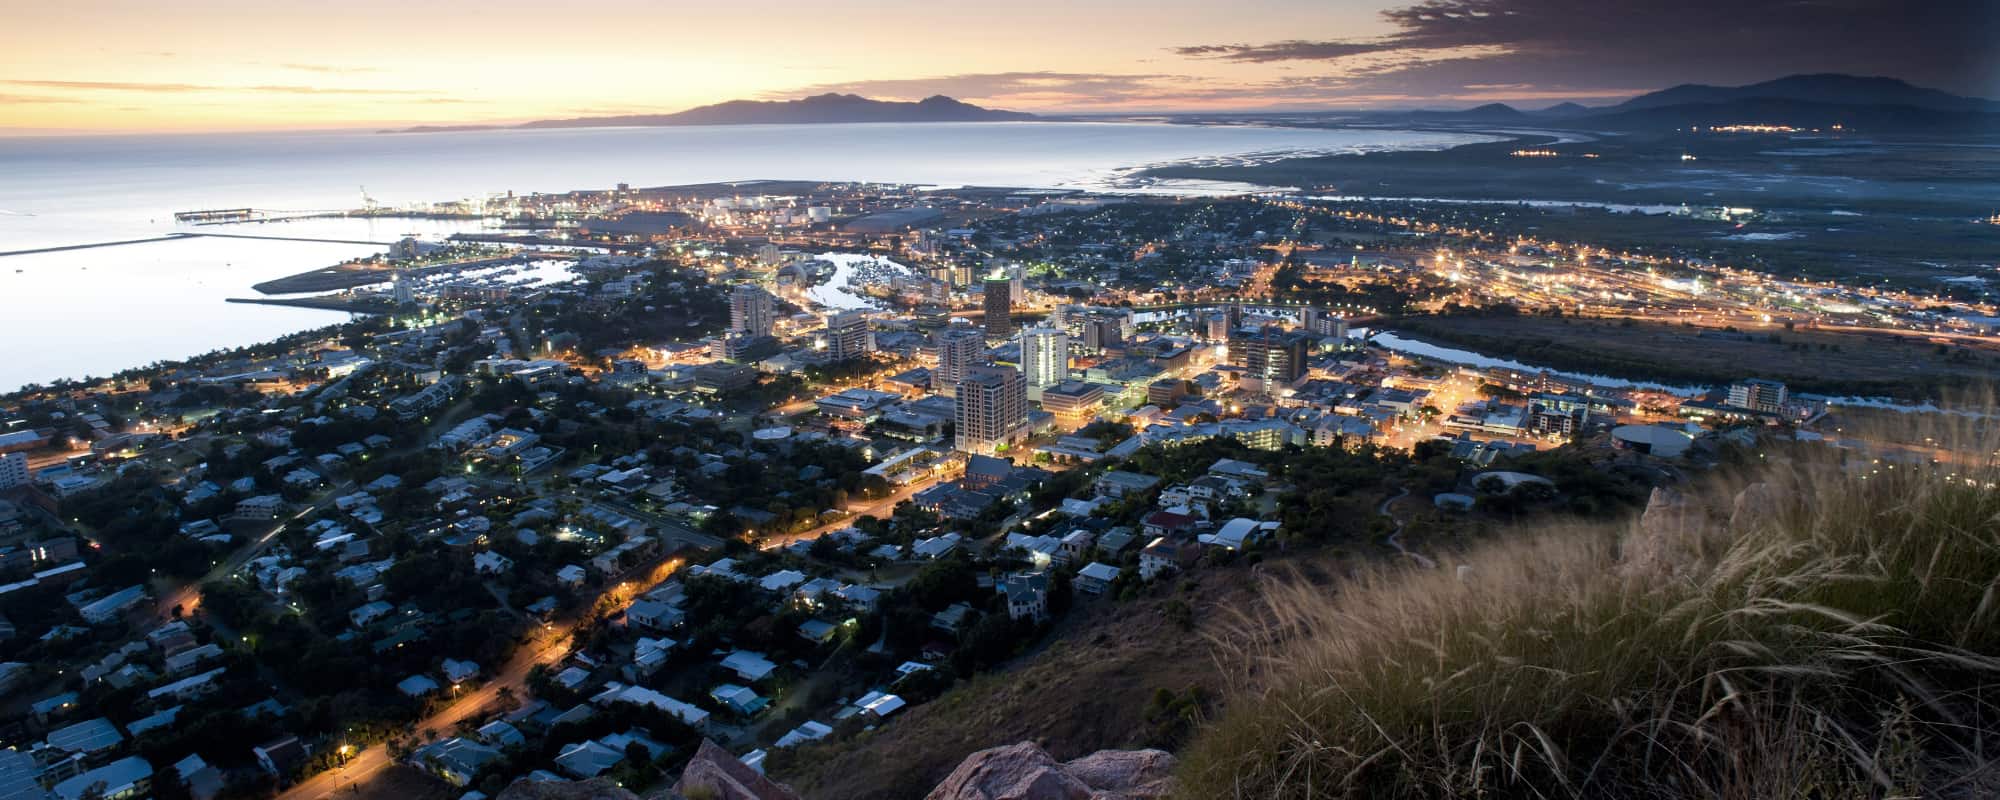 10 Top Tips For Visiting Townsville